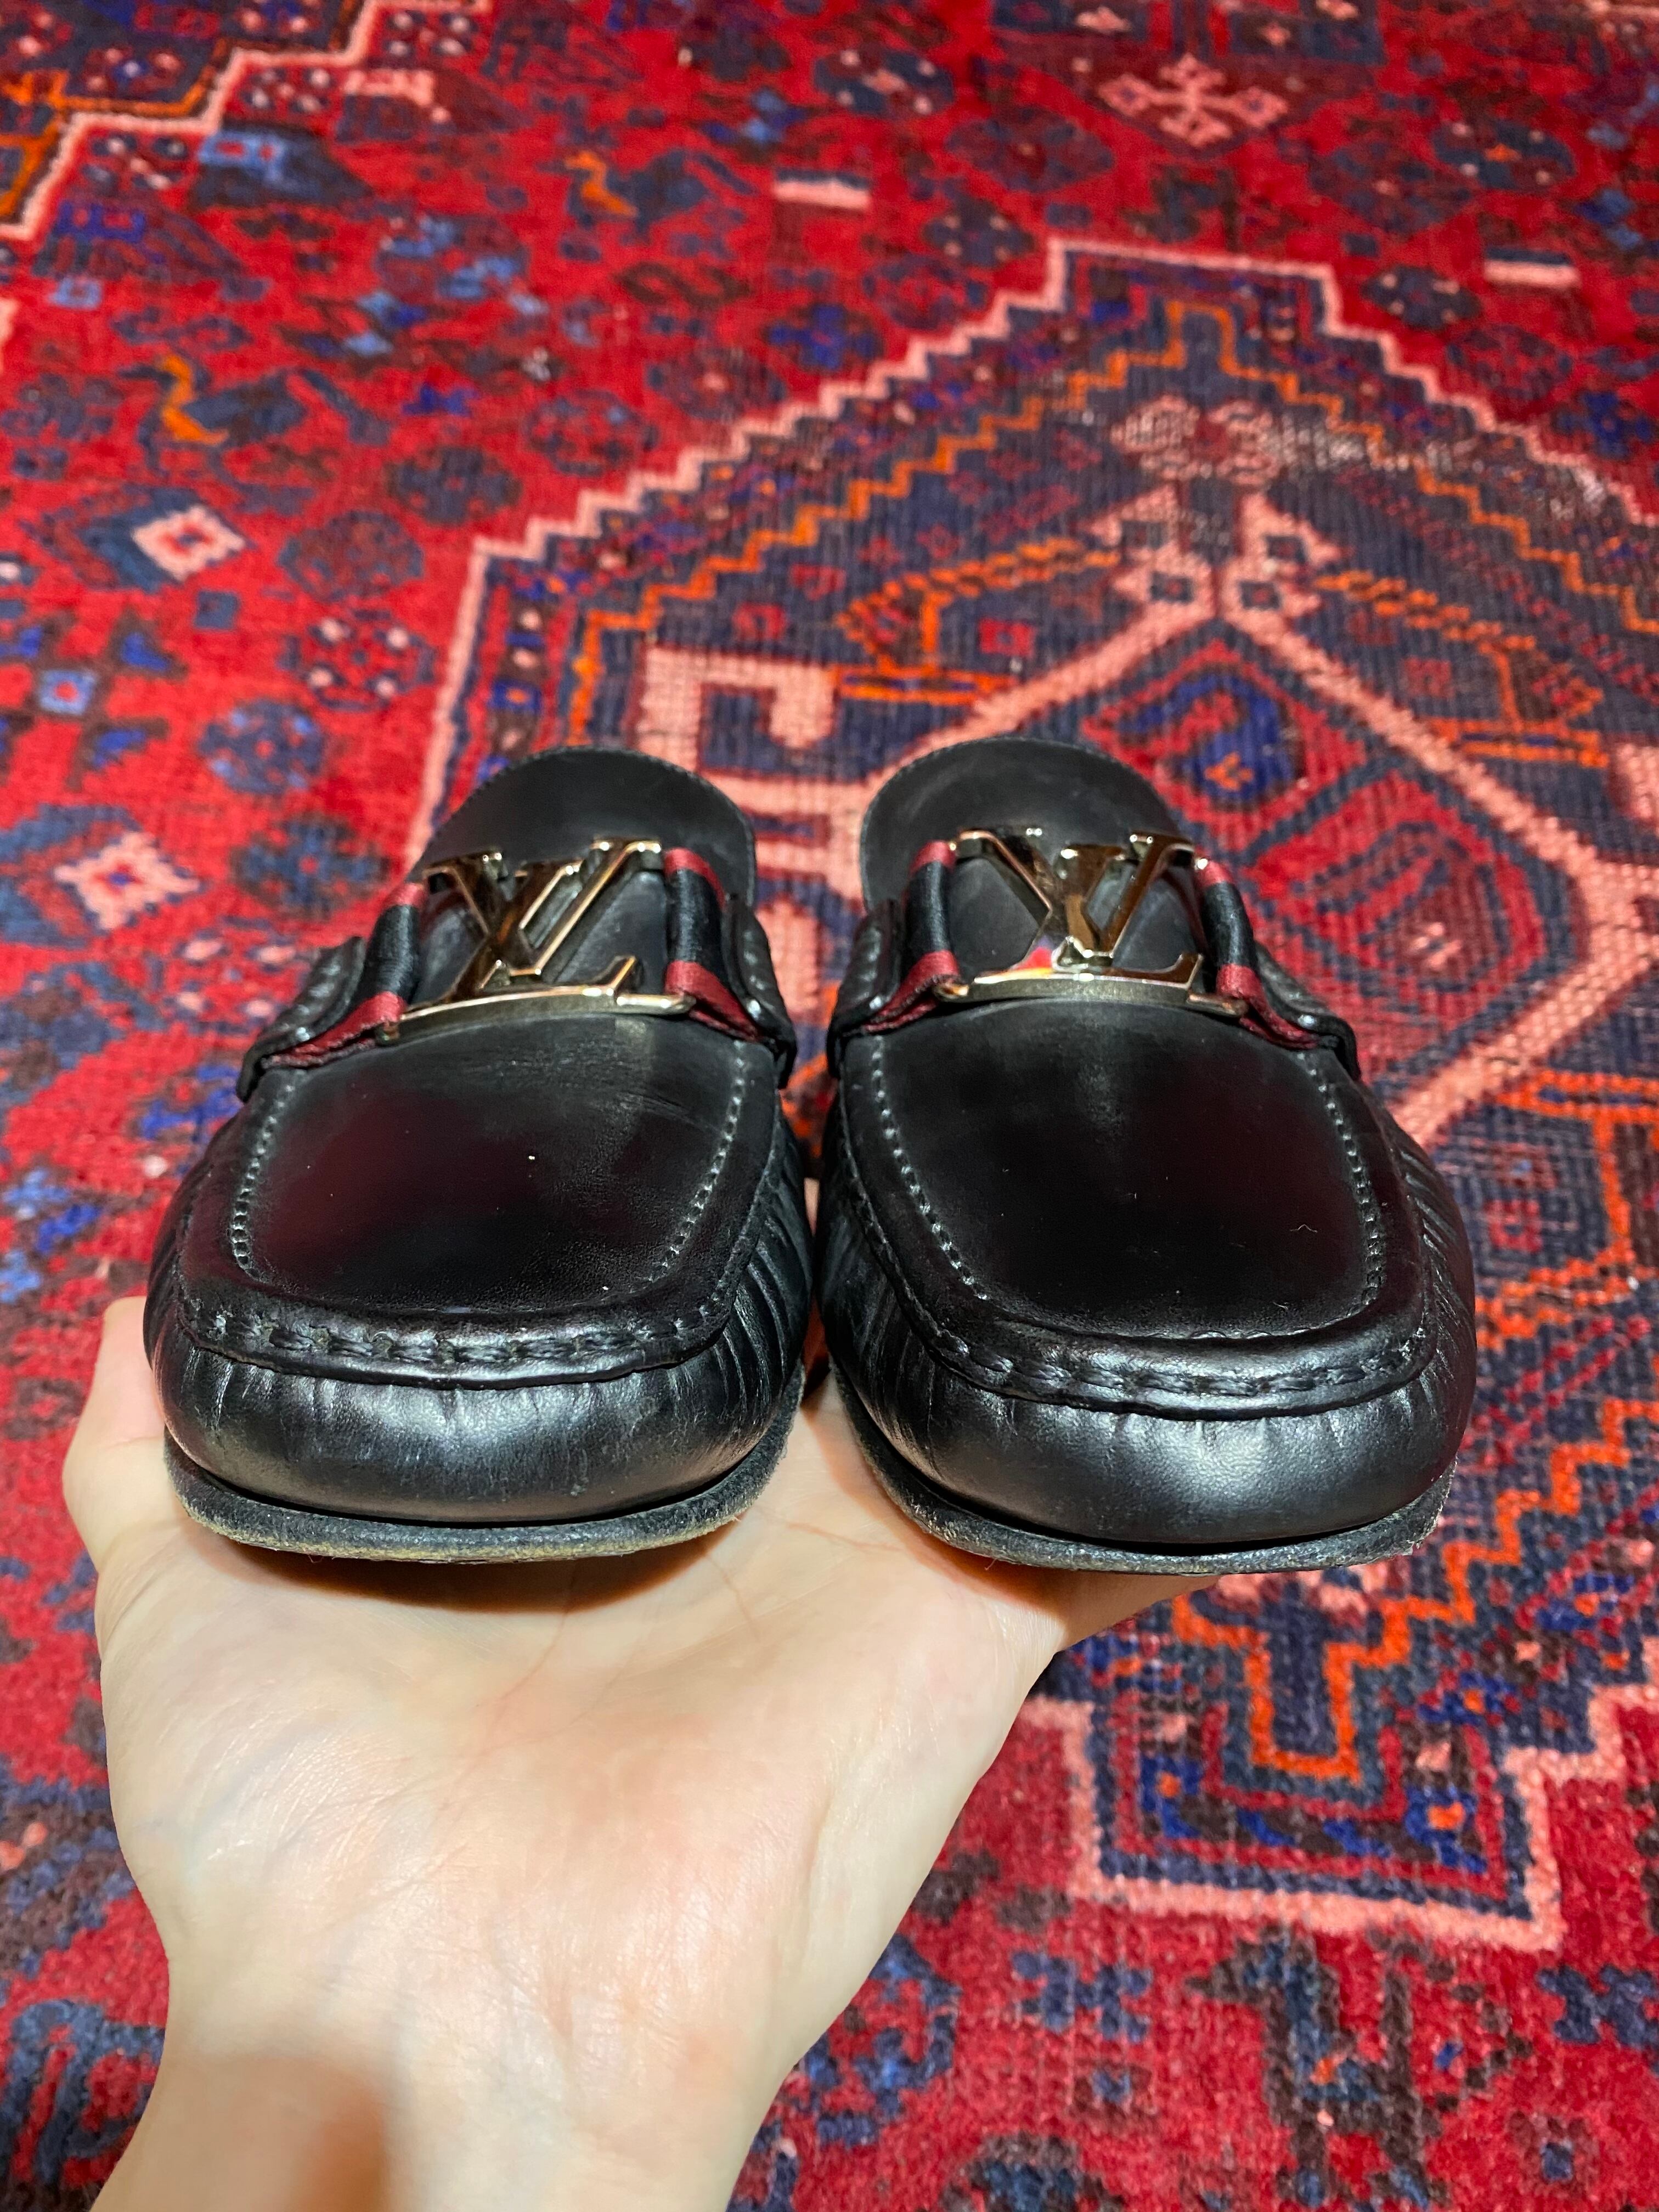 ◎.LOUIS VUITTON LOGO LOAFER FA0117 MADE IN ITALY/ルイヴィトン